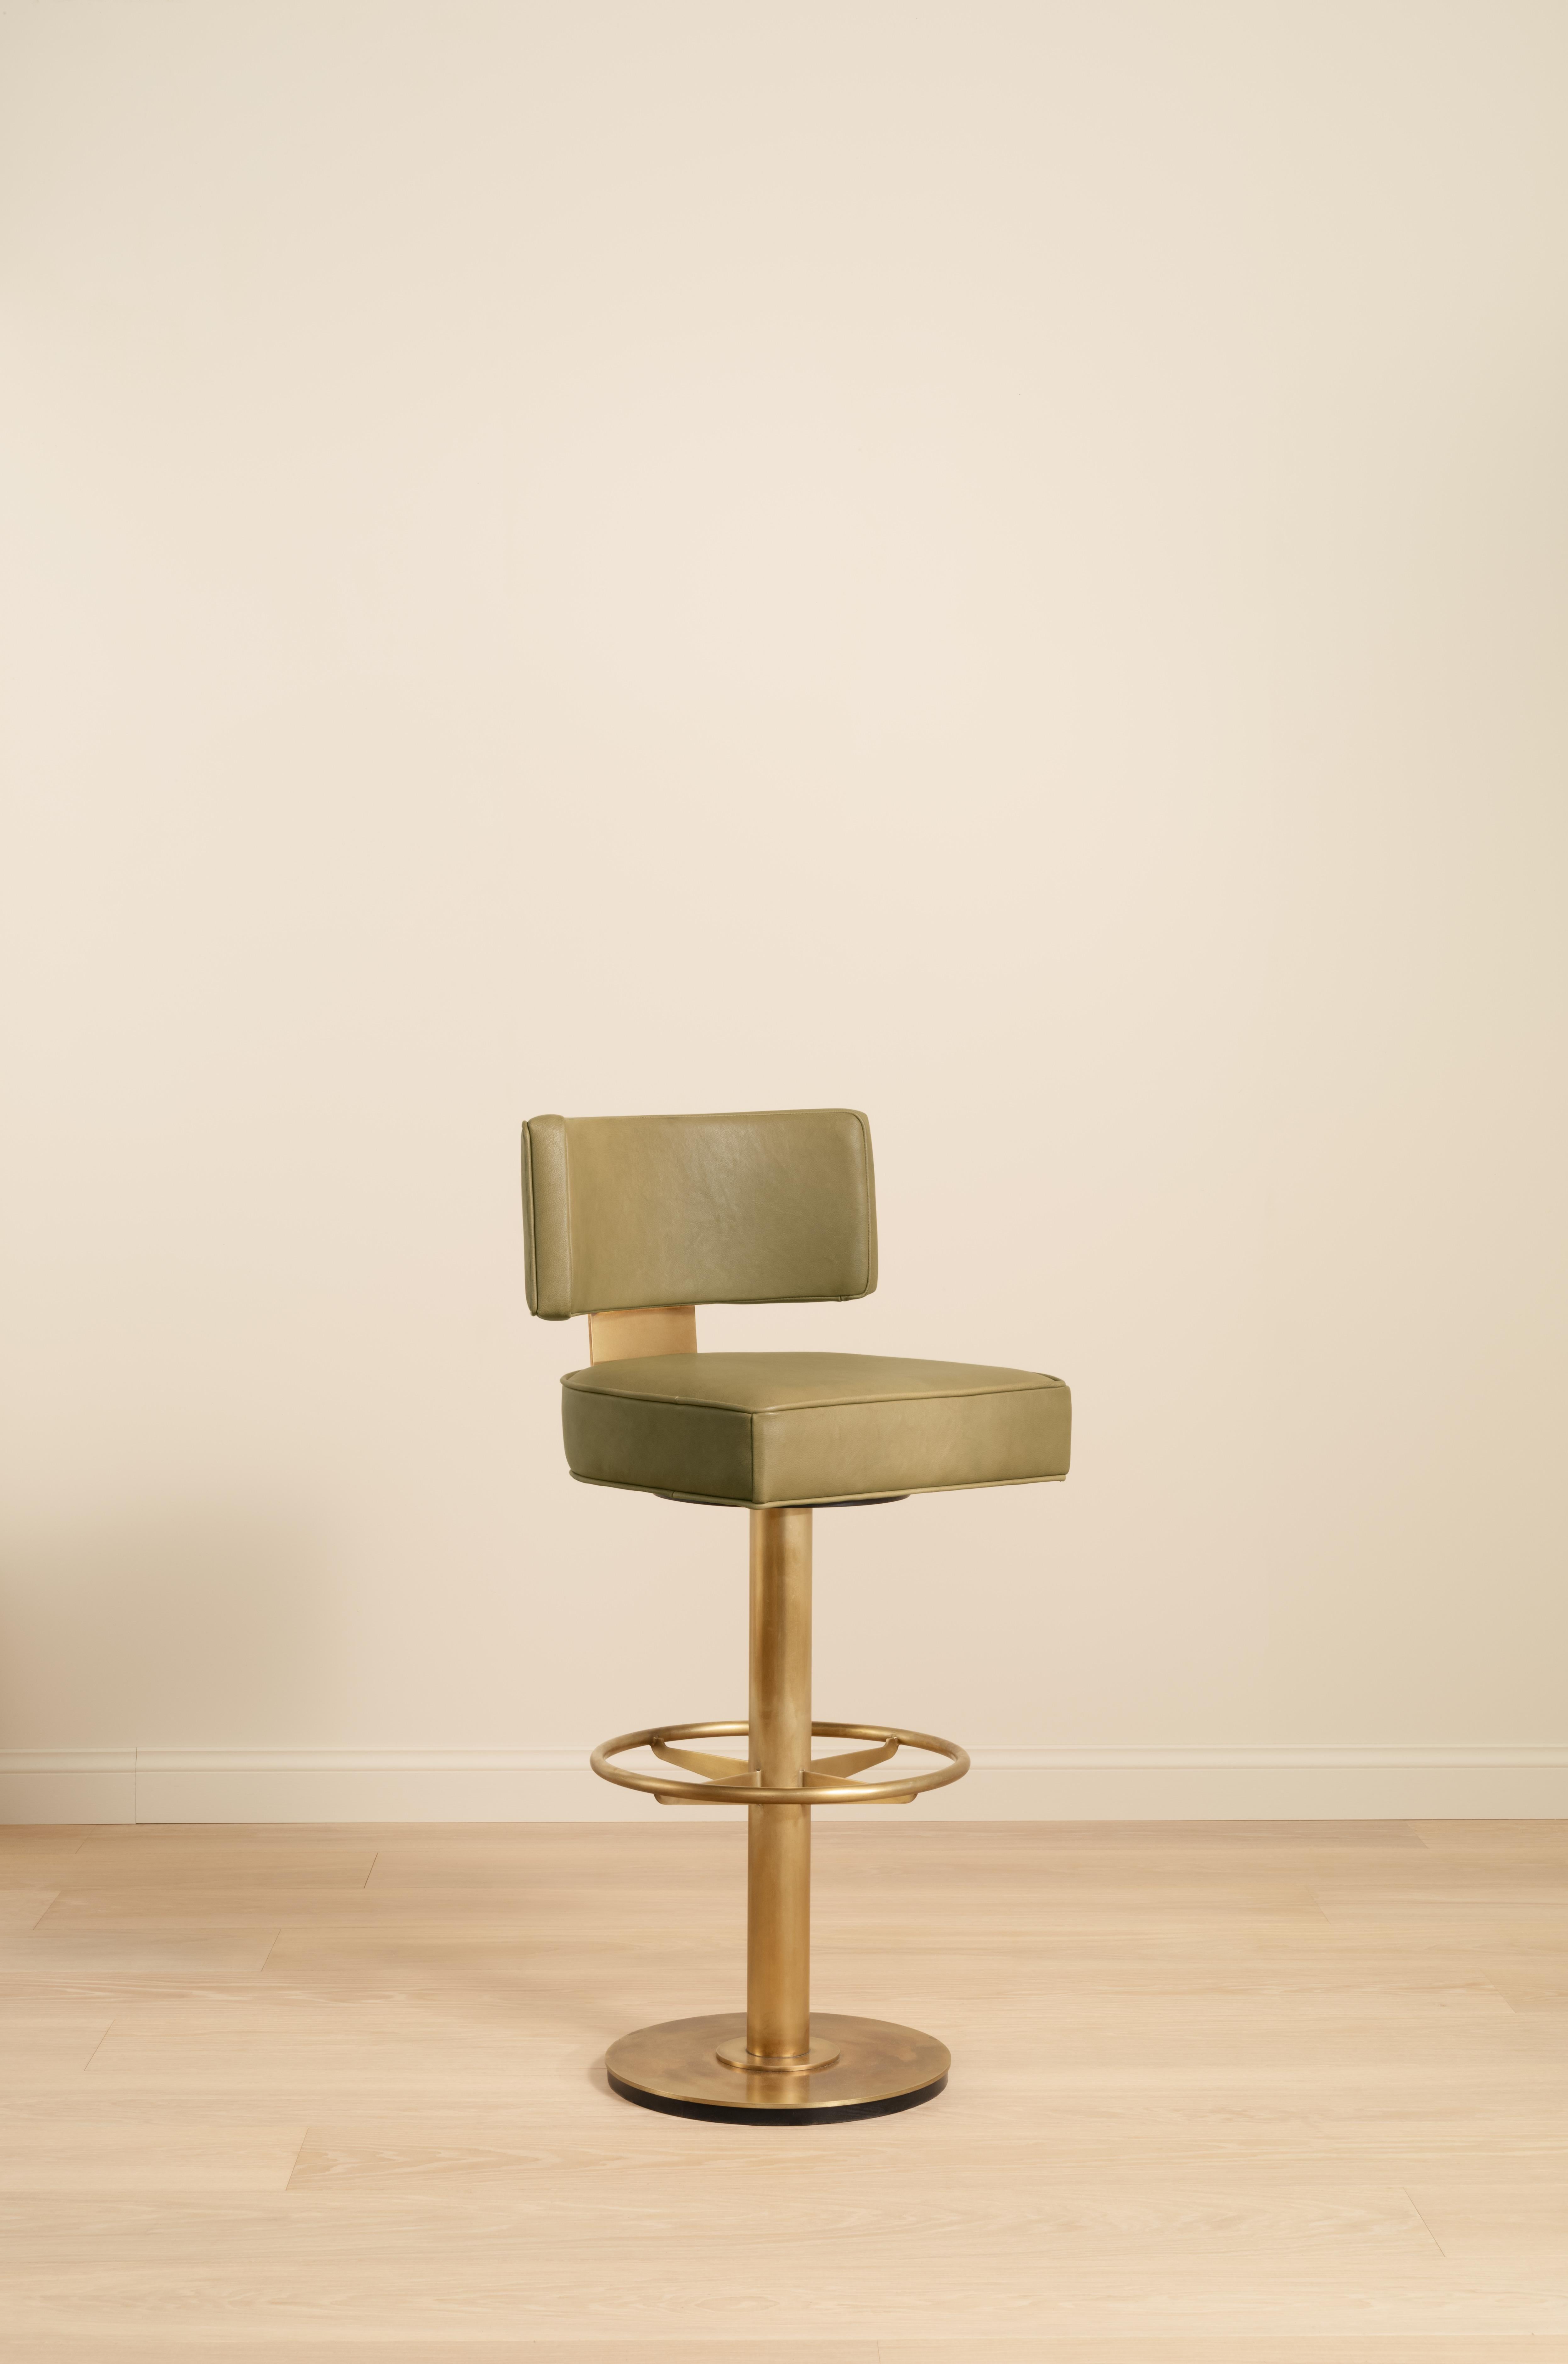 Hand-Crafted Rupert Bevan Lafon Barstool (in Customer's Own choice of Material/Leather) For Sale